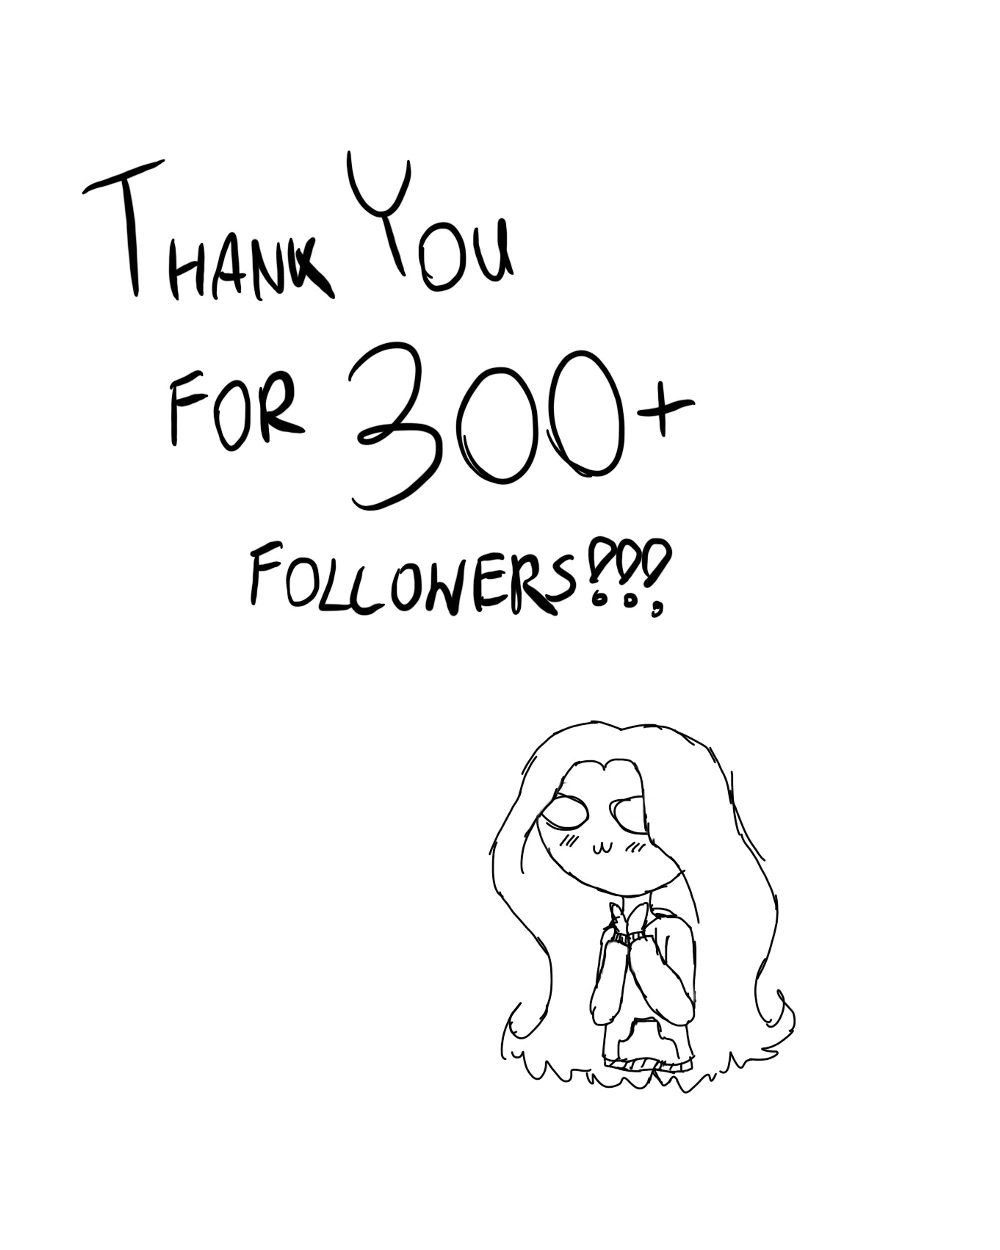 THANK U FOR 300+